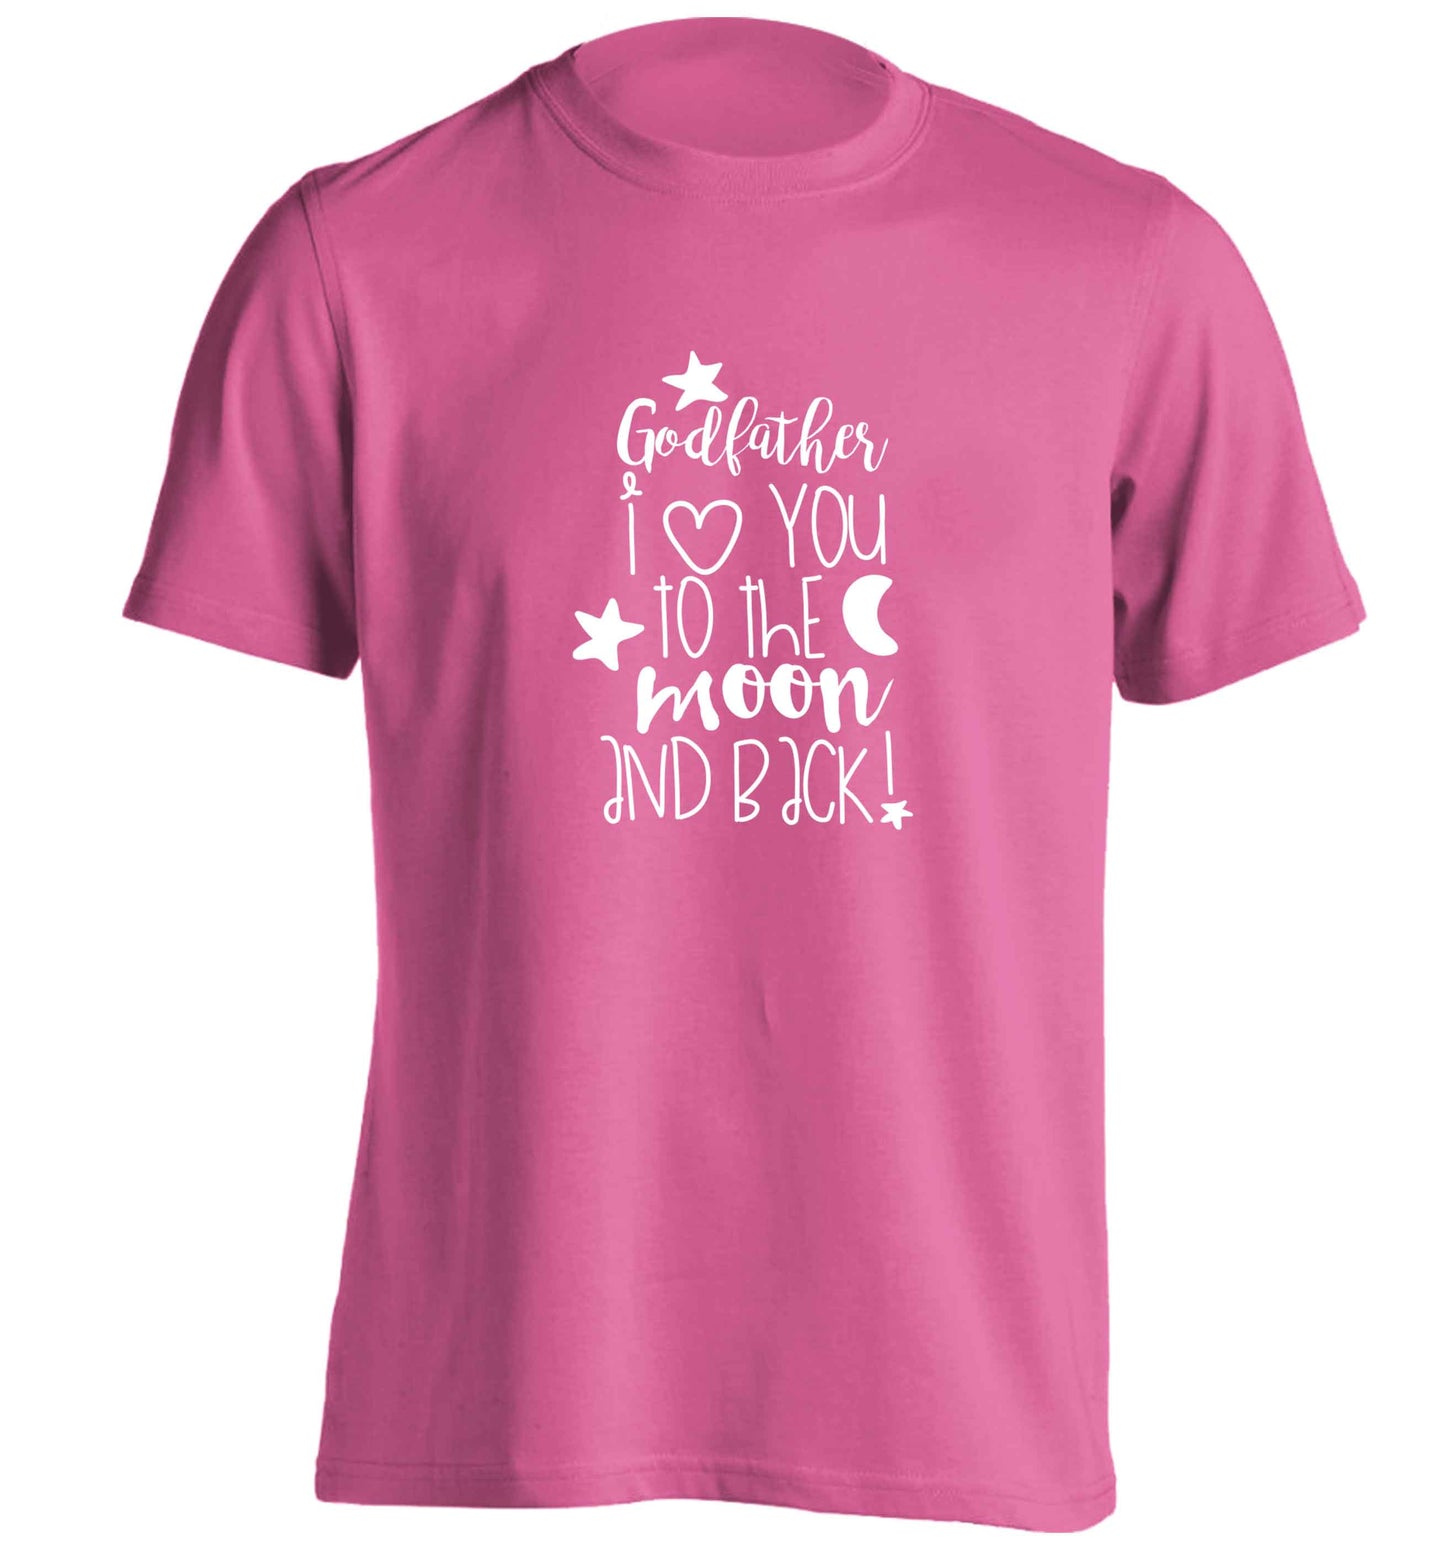 Godfather I love you to the moon and back adults unisex pink Tshirt 2XL